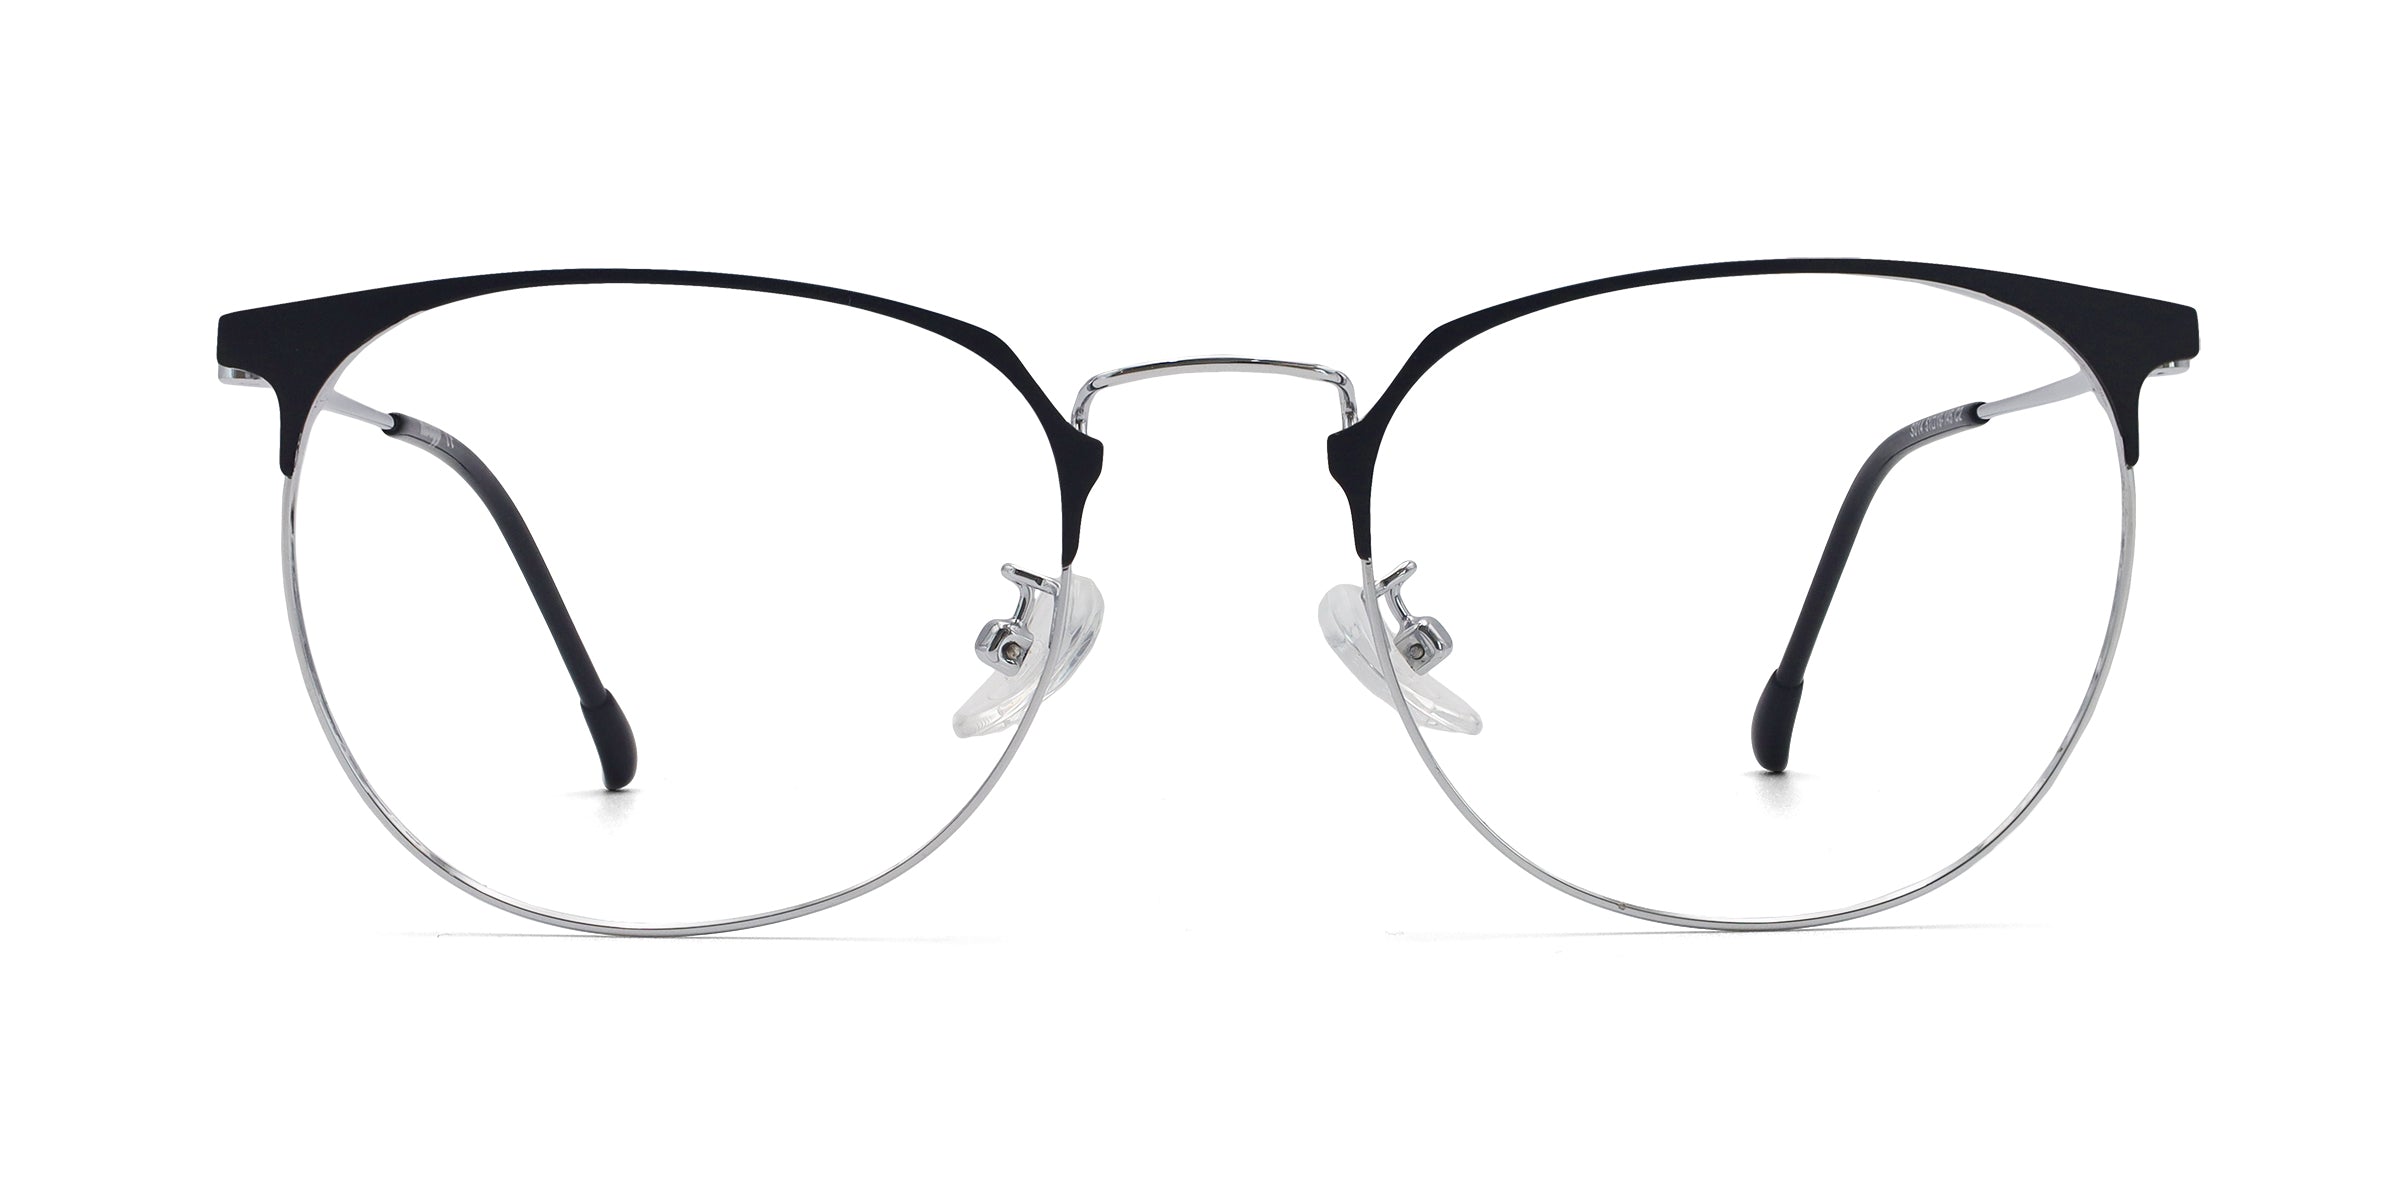 moon round black silver eyeglasses frames front view